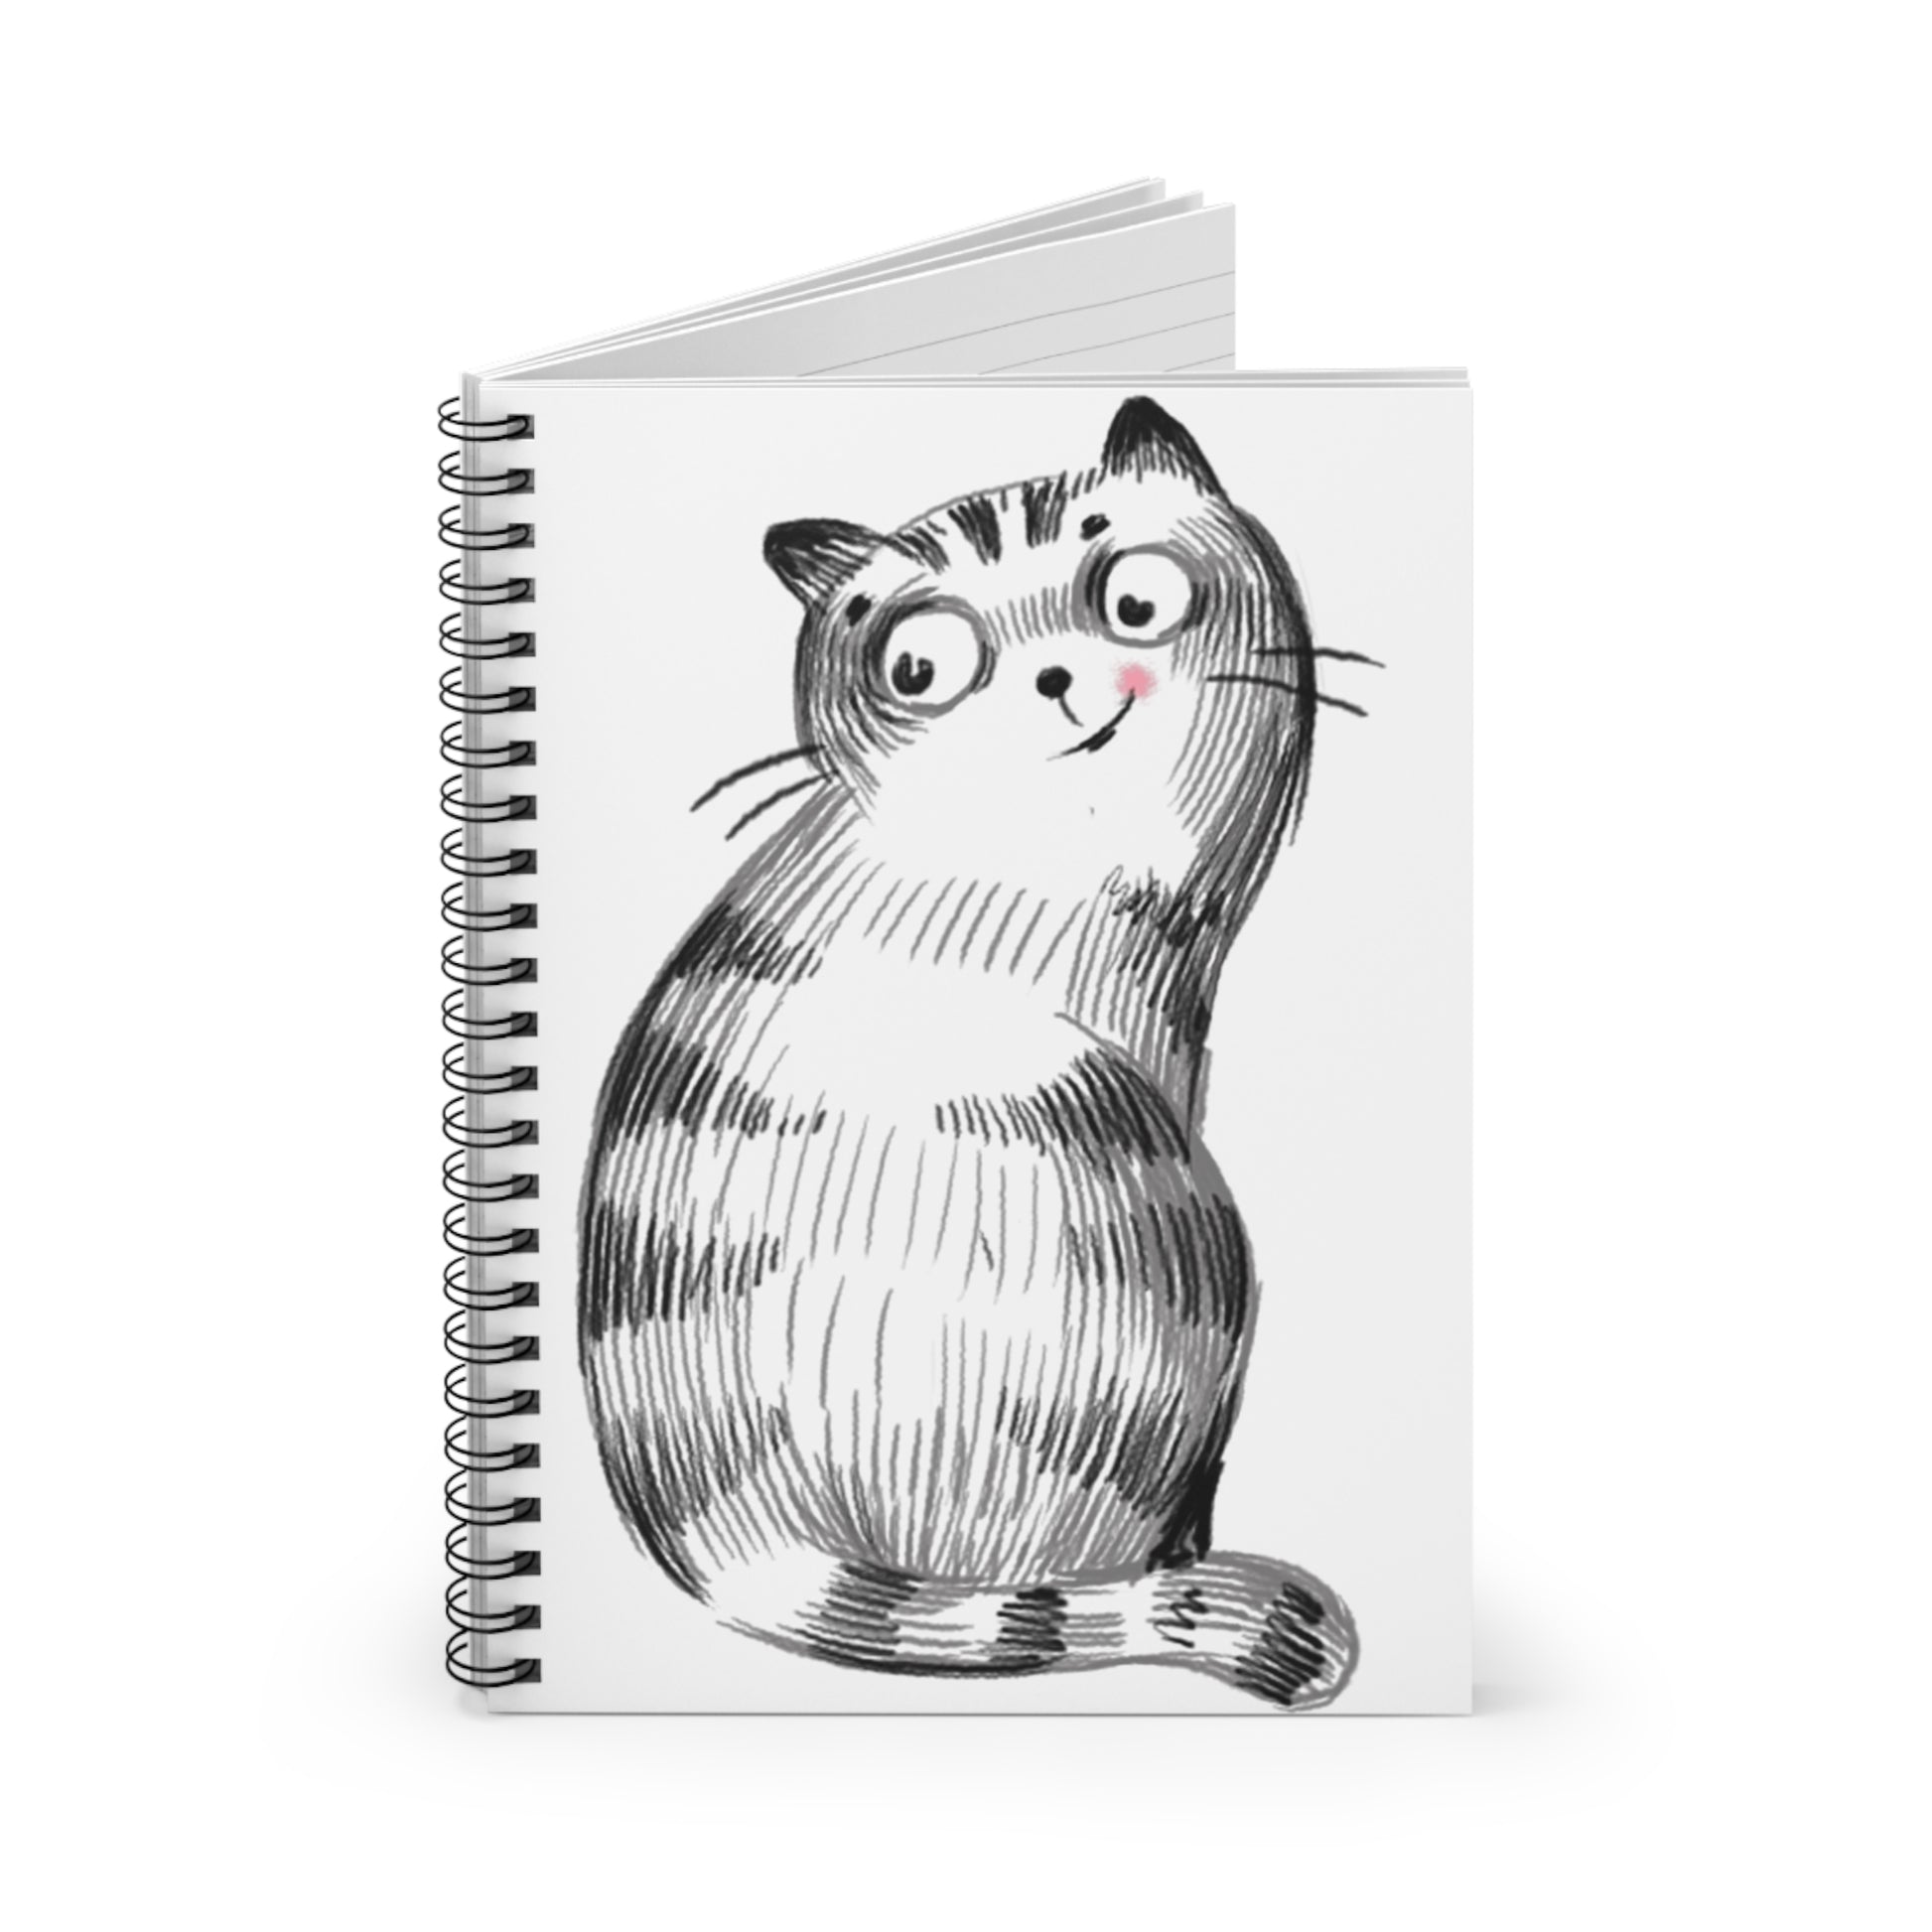 I Hear Treats: Spiral Notebook - Log Books - Journals - Diaries - and More Custom Printed by TheGlassyLass